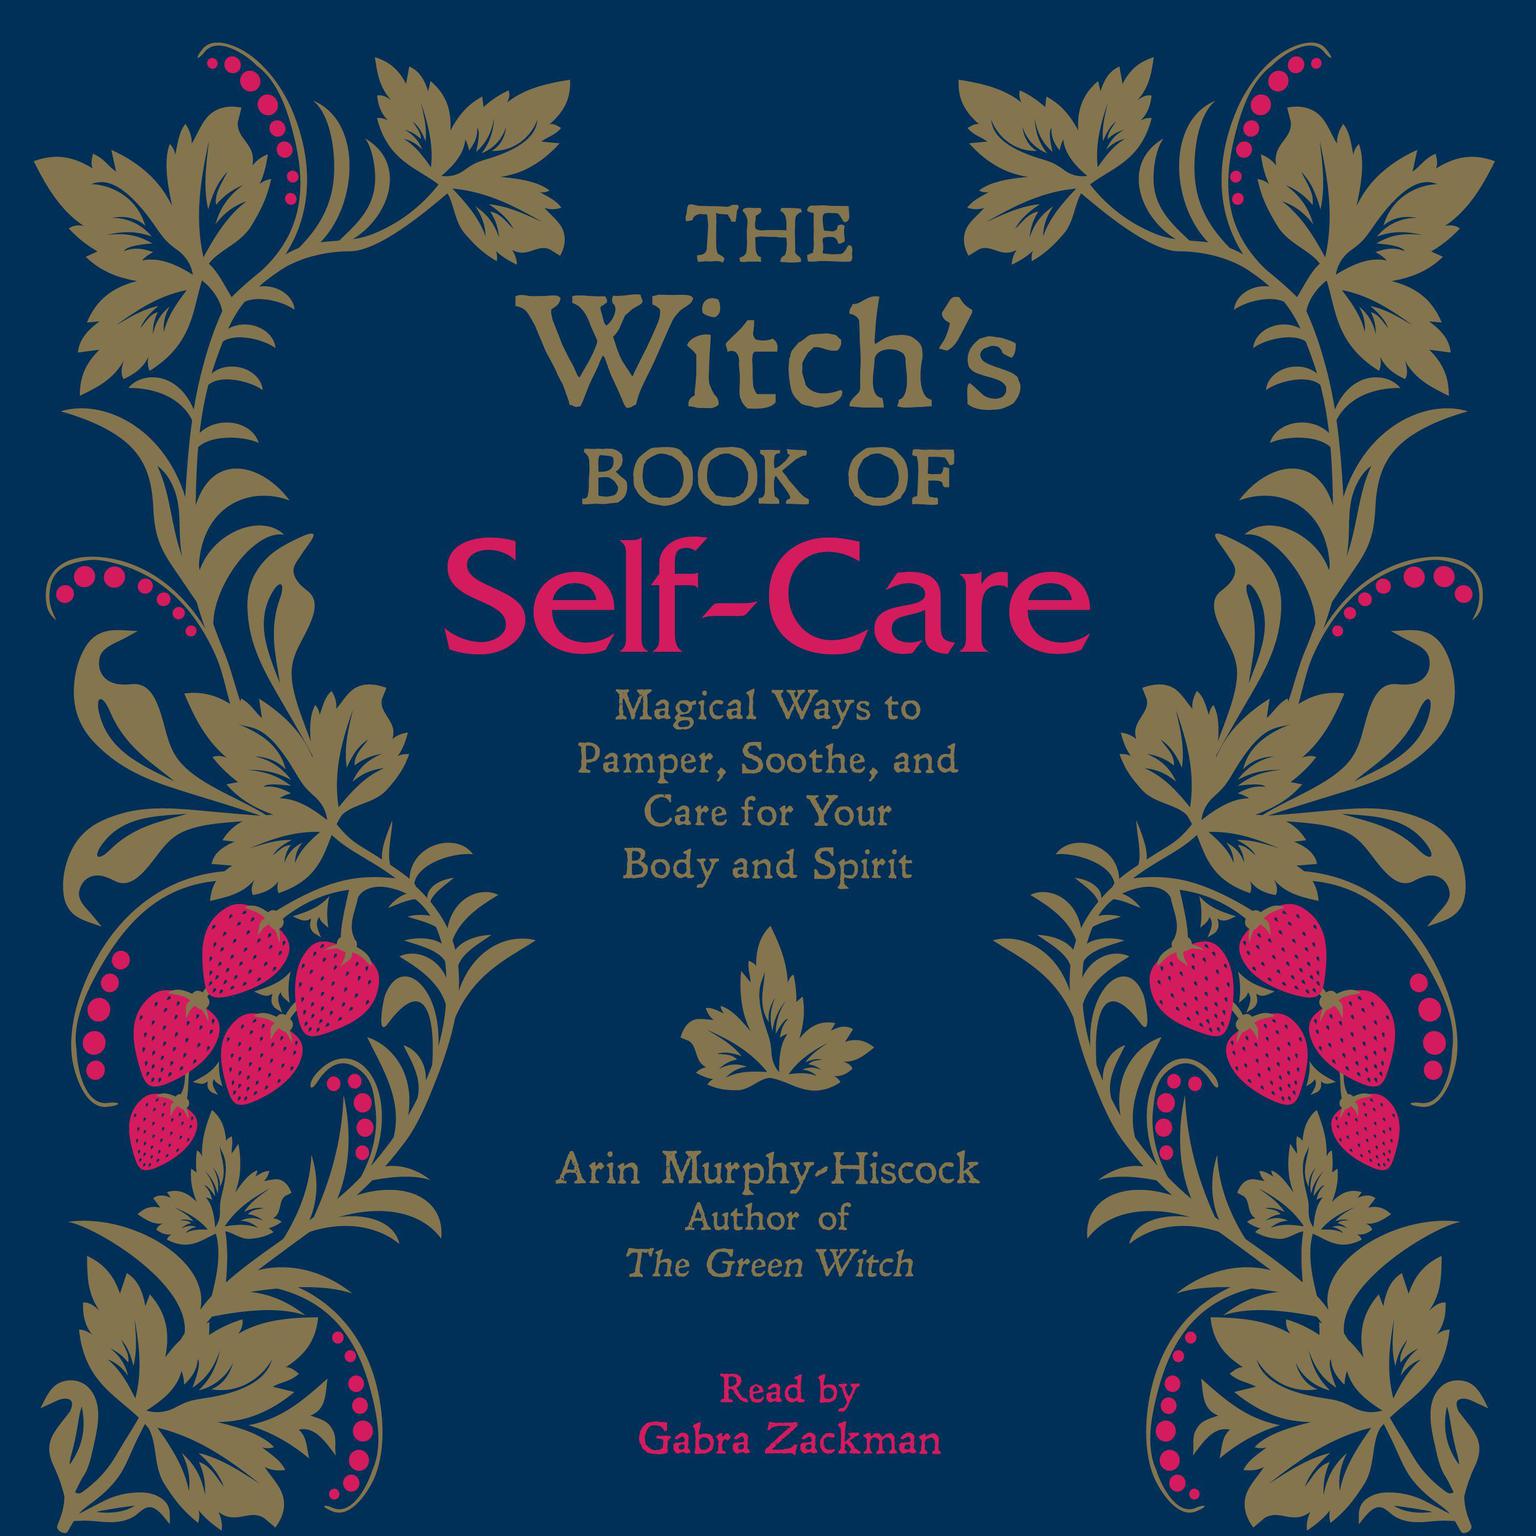 The Witchs Book of Self-Care: Magical Ways to Pamper, Soothe, and Care for Your Body and Spirit Audiobook, by Arin Murphy-Hiscock